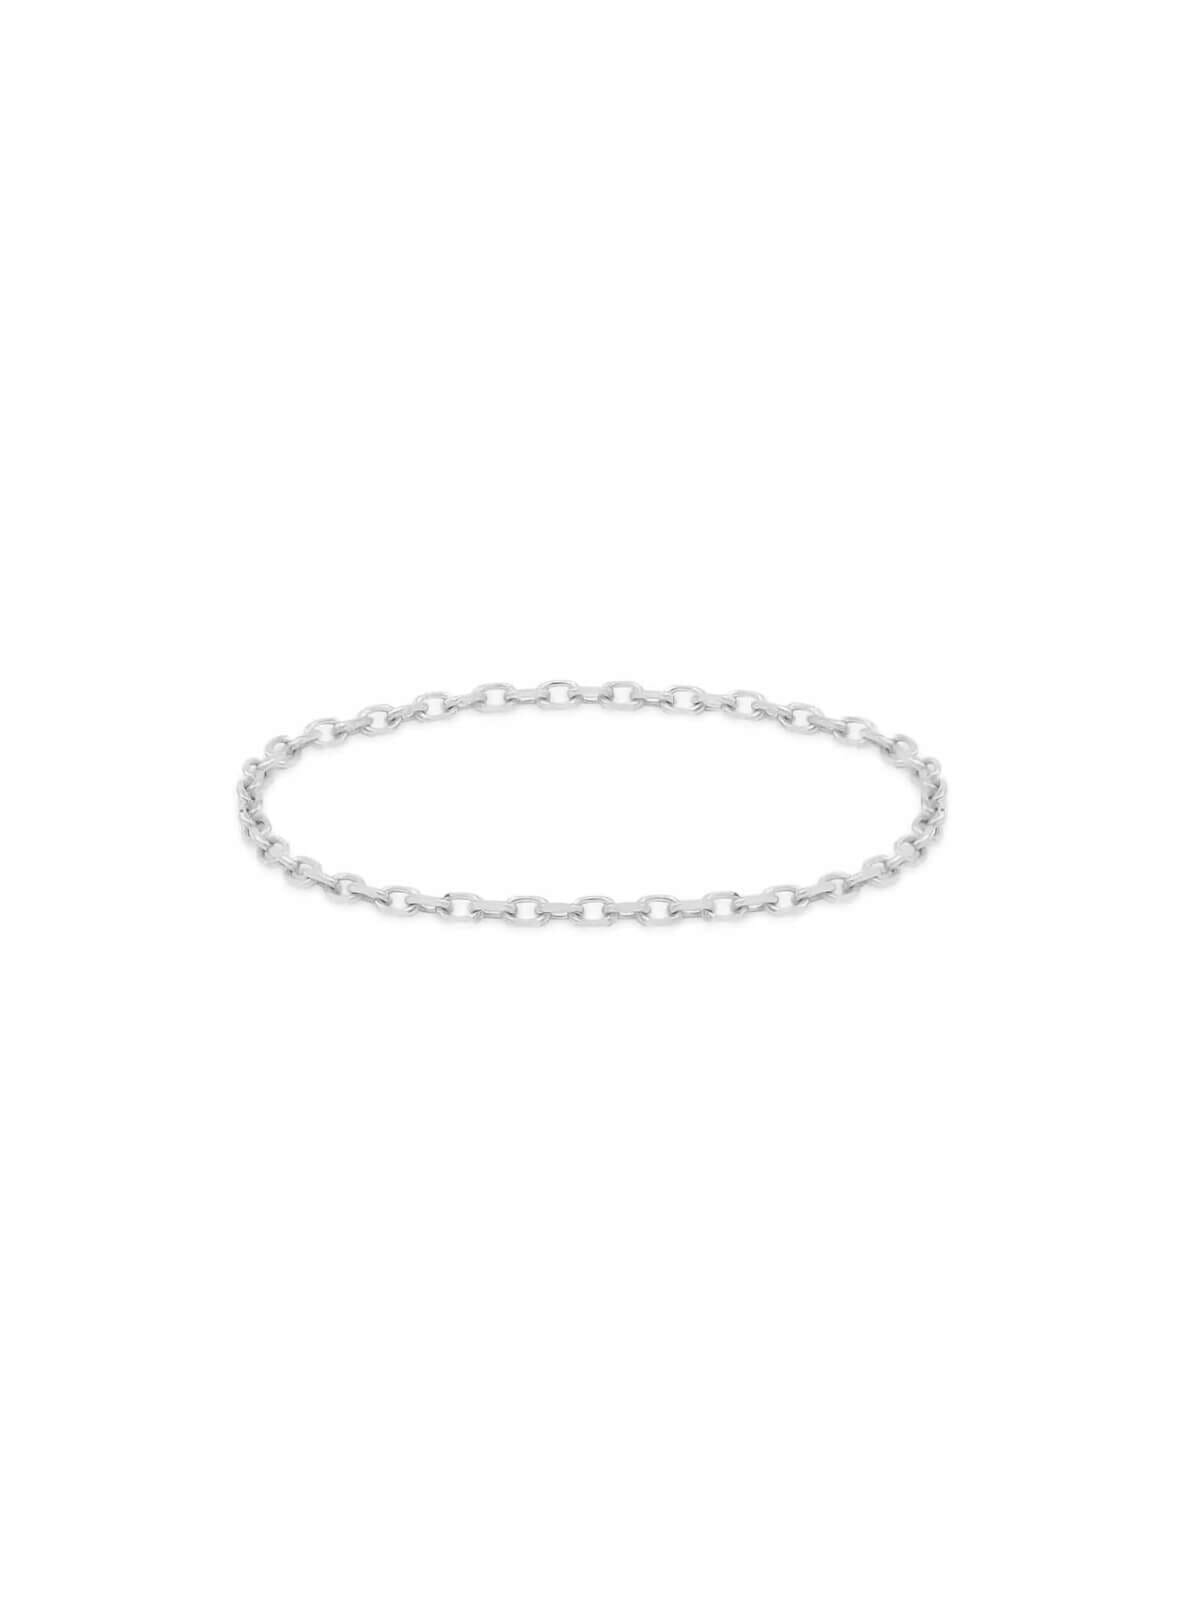 By Charlotte | 14K White Gold Purity Chain Ring | Perlu